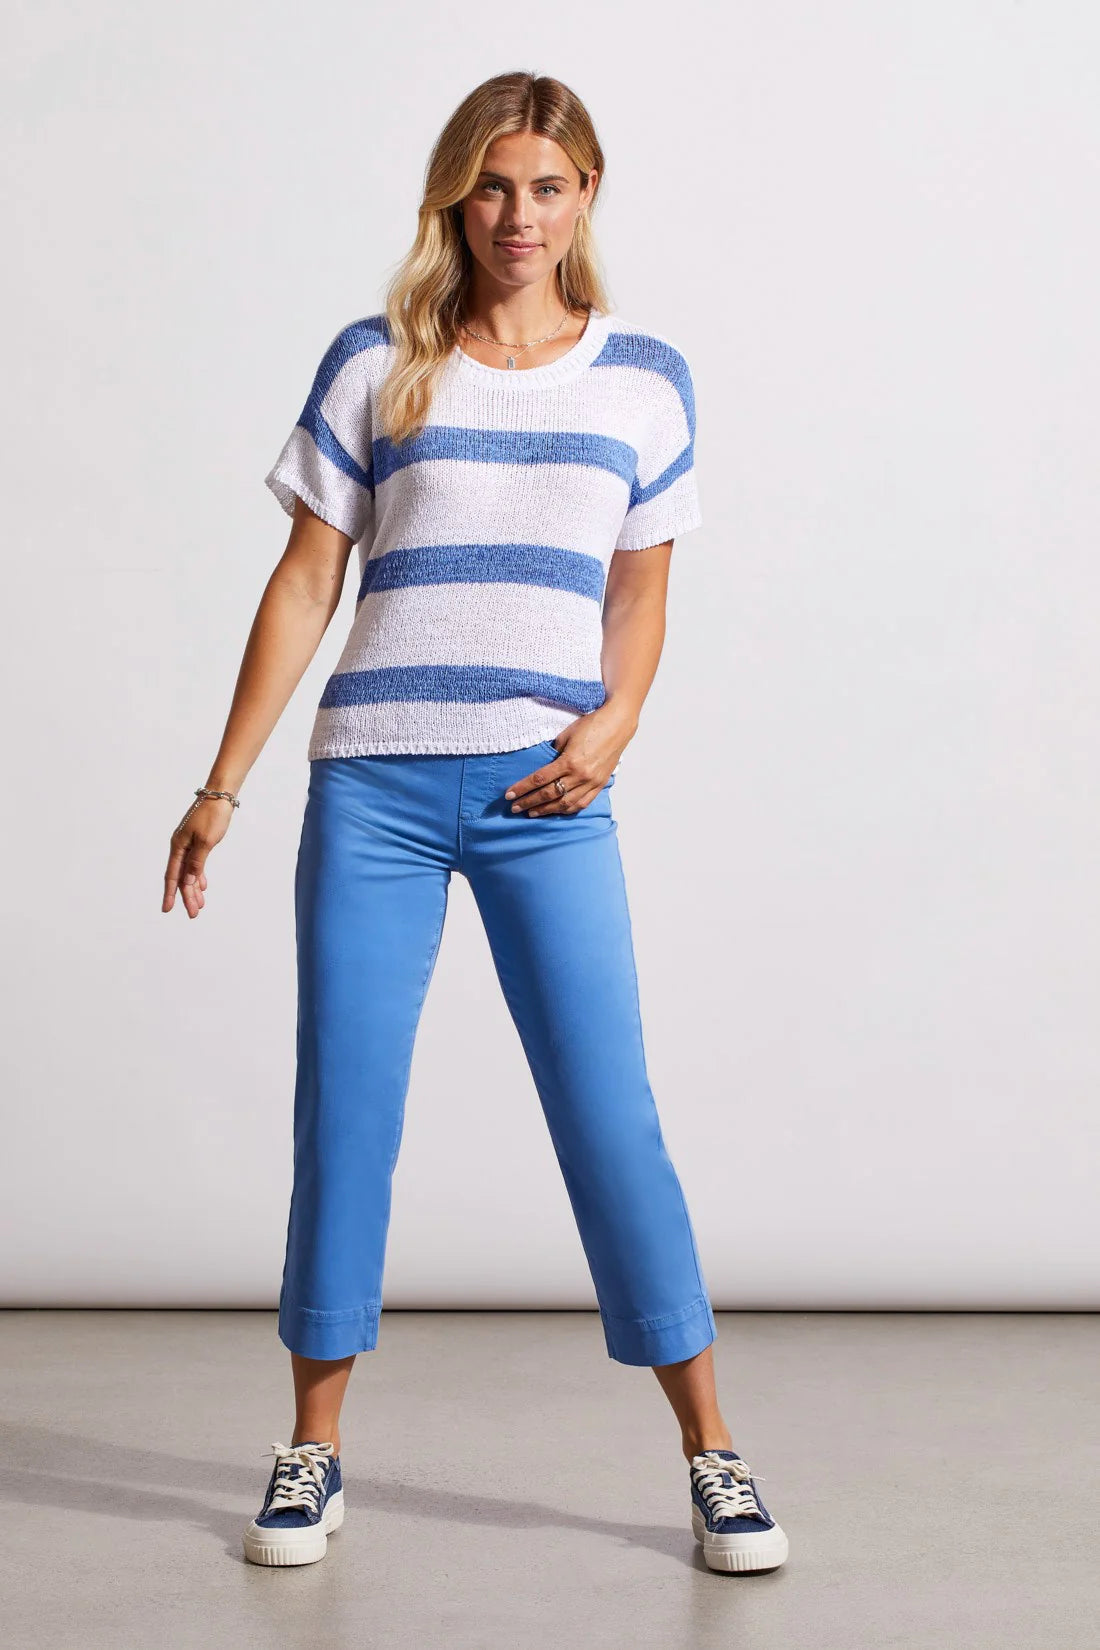 Greet sunny days in style with these pull-on capris rocking an elastic waist that sits smooth but stretches when needed.